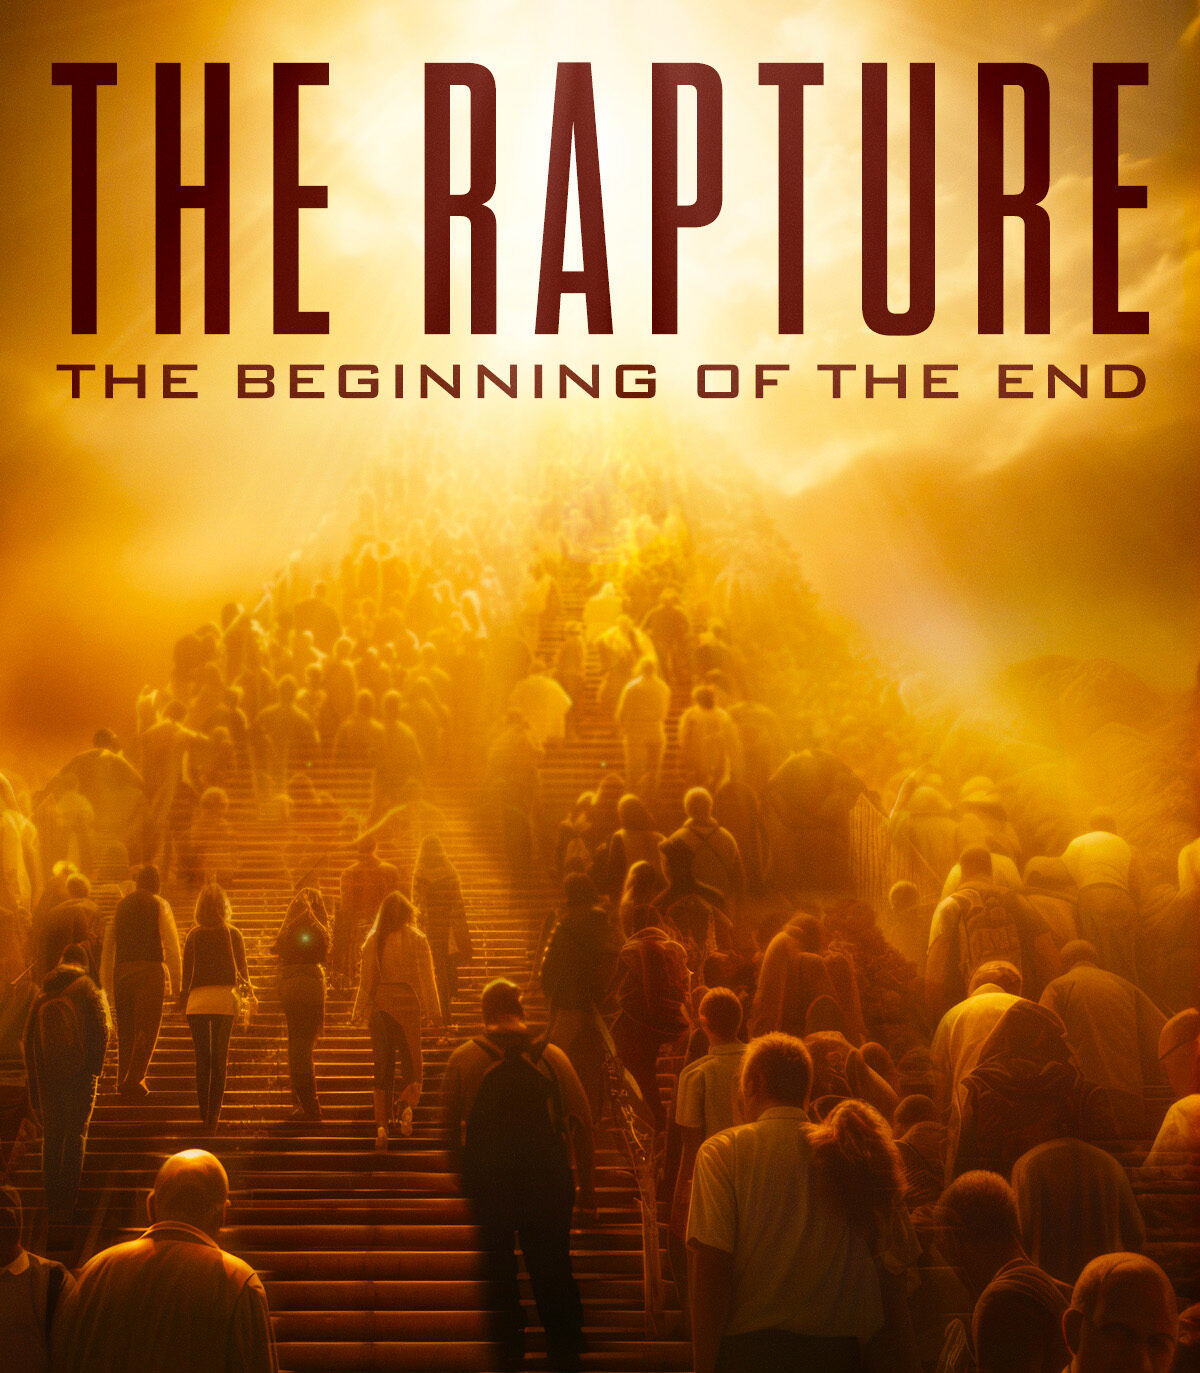 Is the Rapture Imminent?